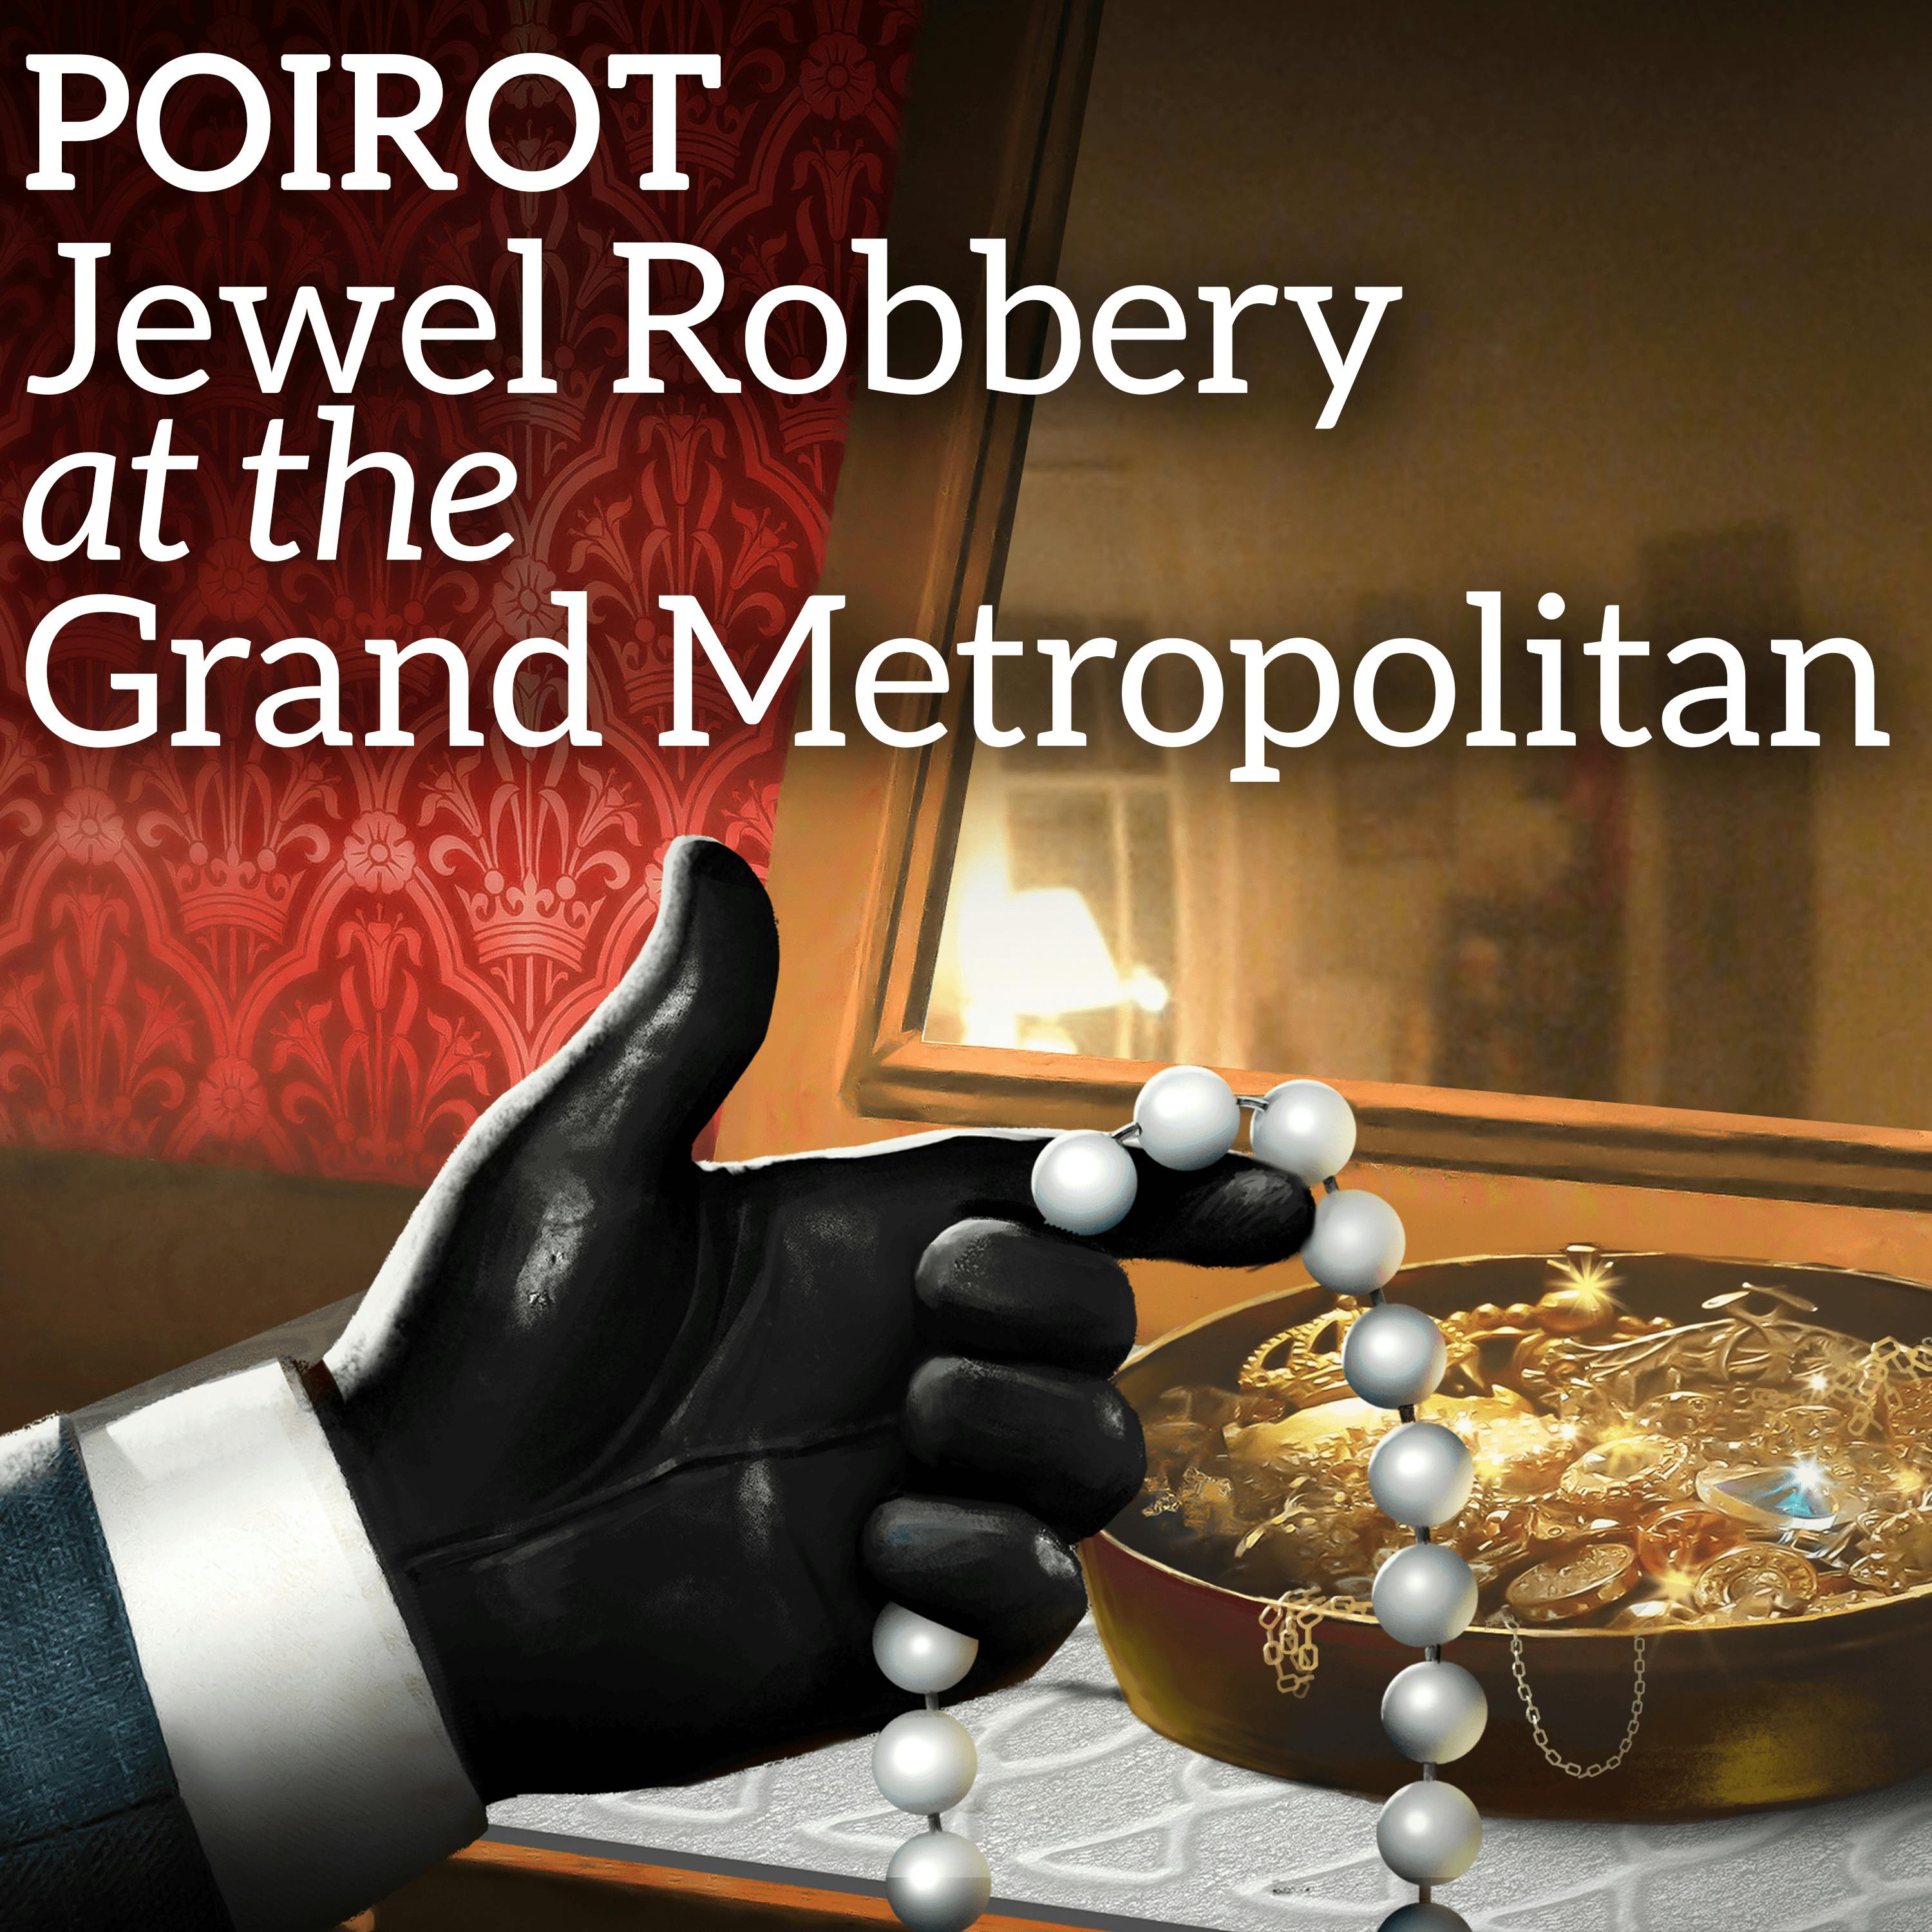 A Mystery Story - Poirot Investigates The Jewel Robbery at the Grand Metropolitan